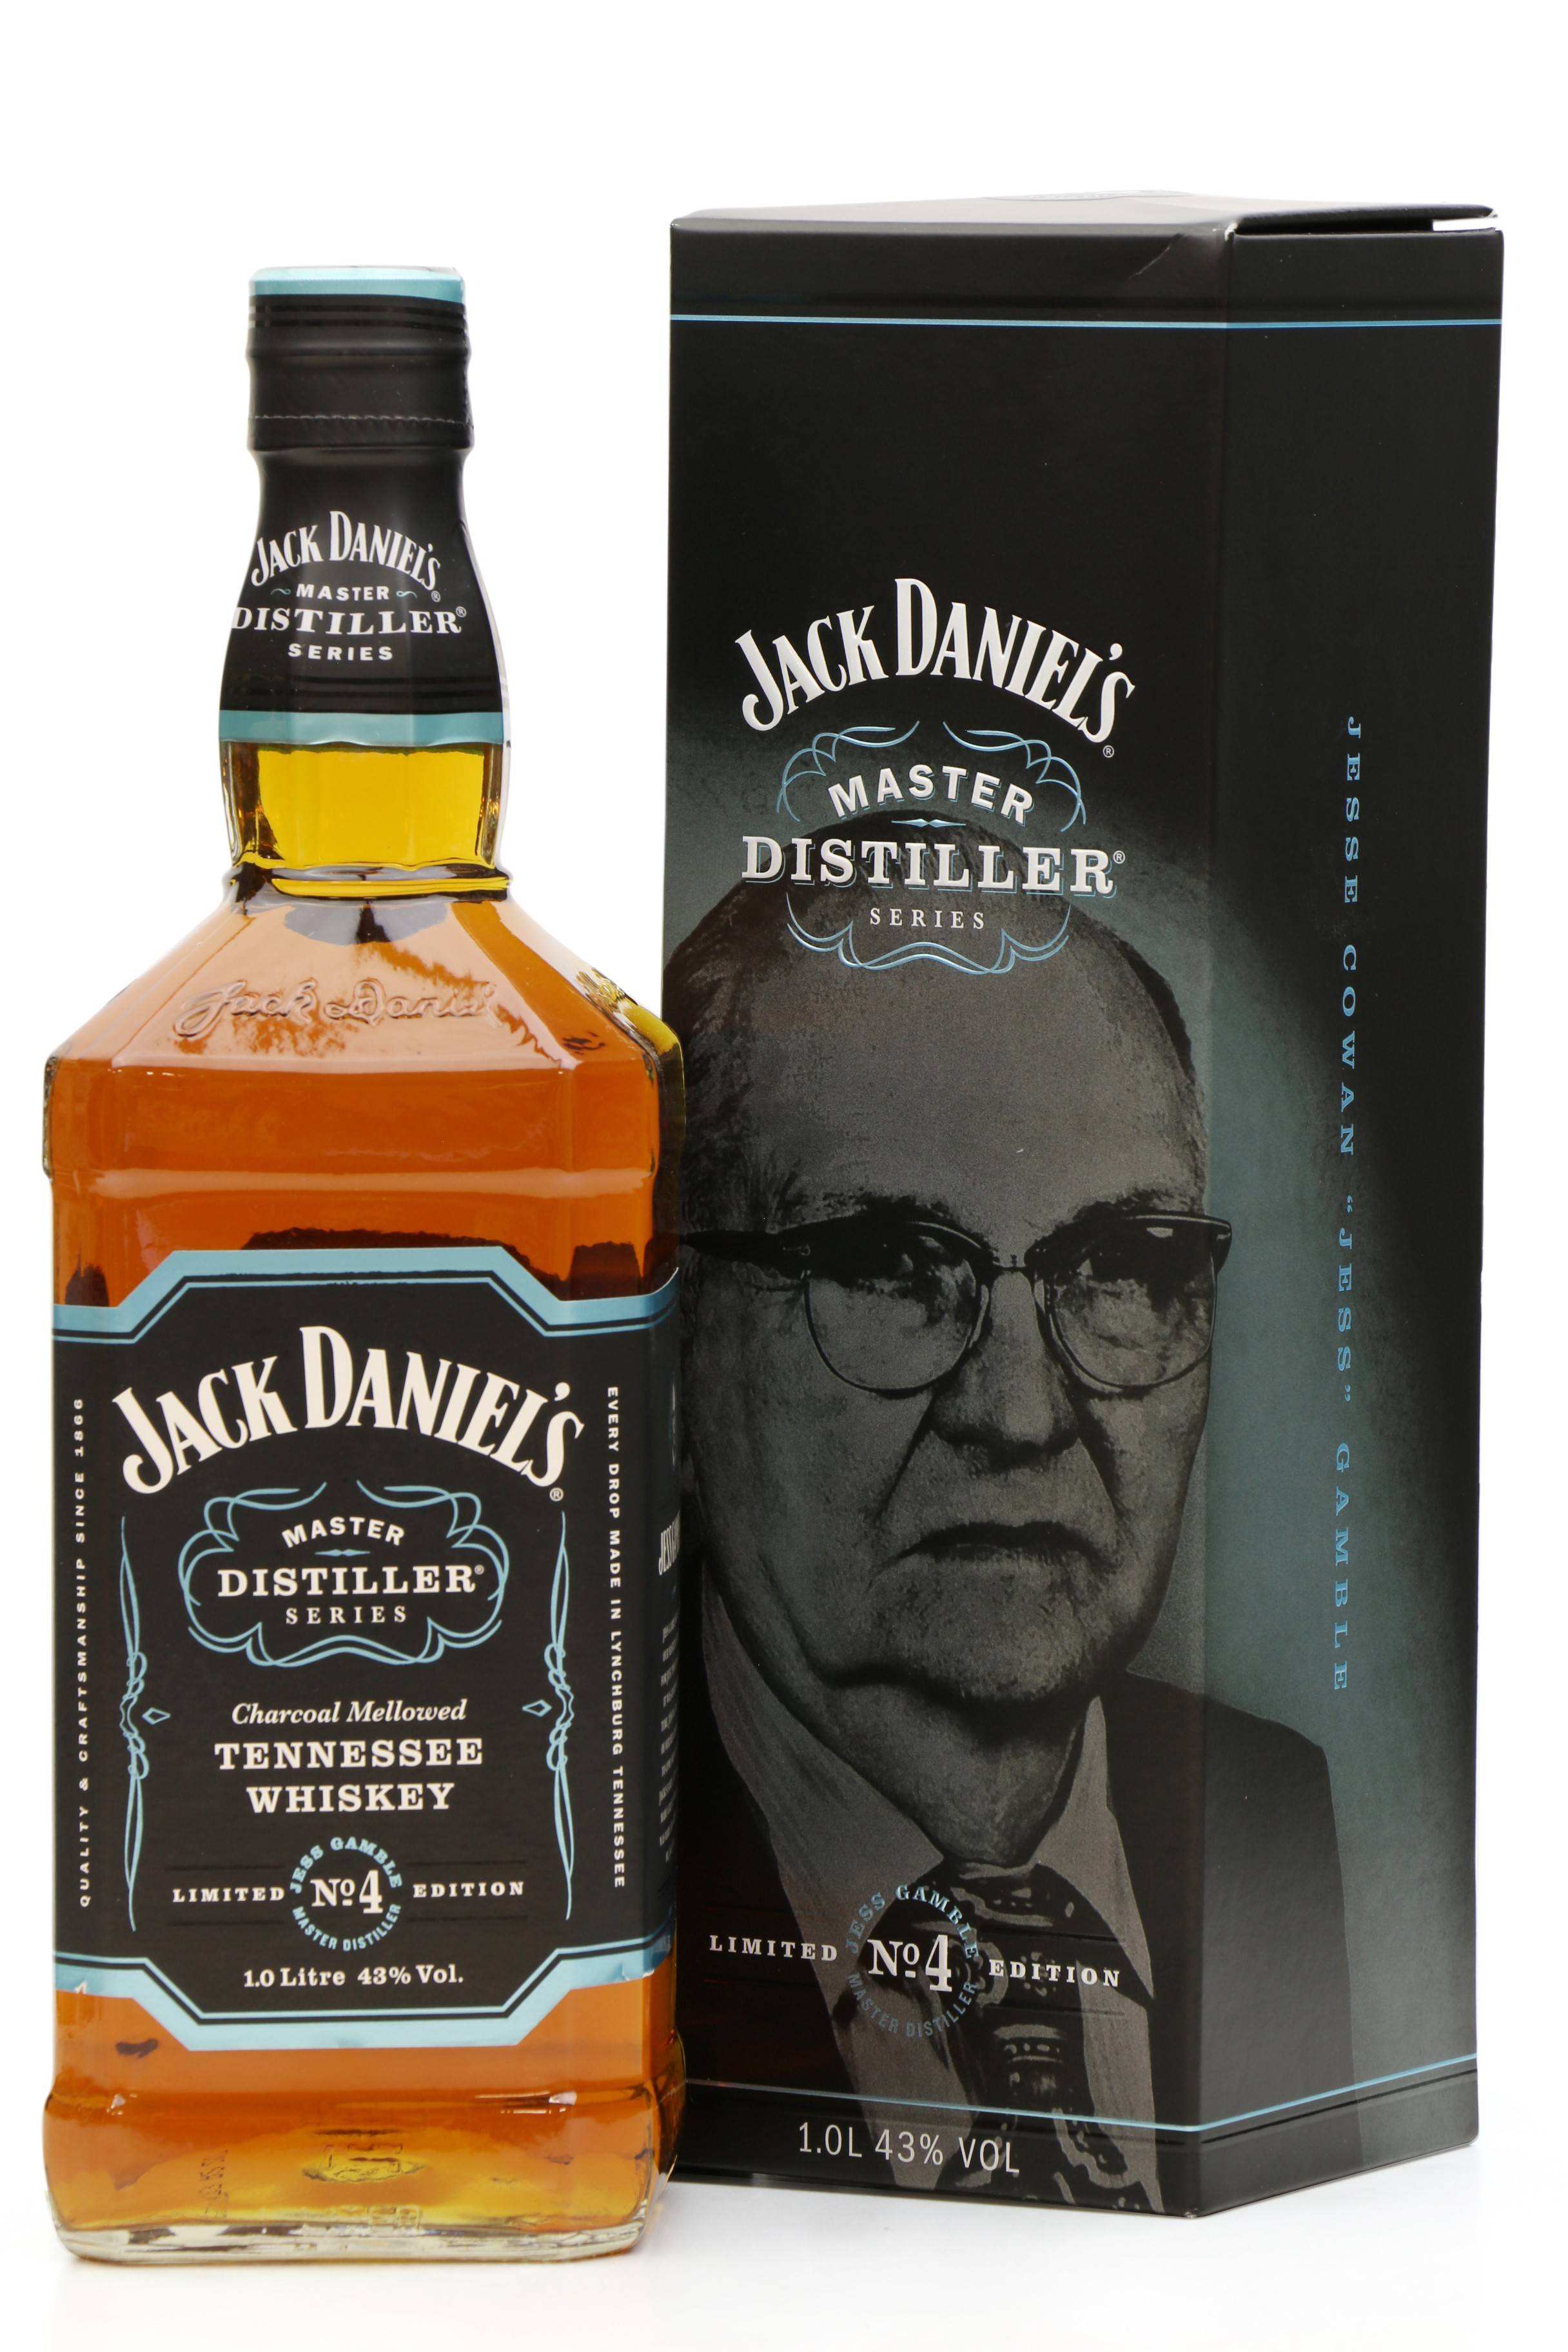 The man who makes the whiskey: Jack Daniels' master distiller